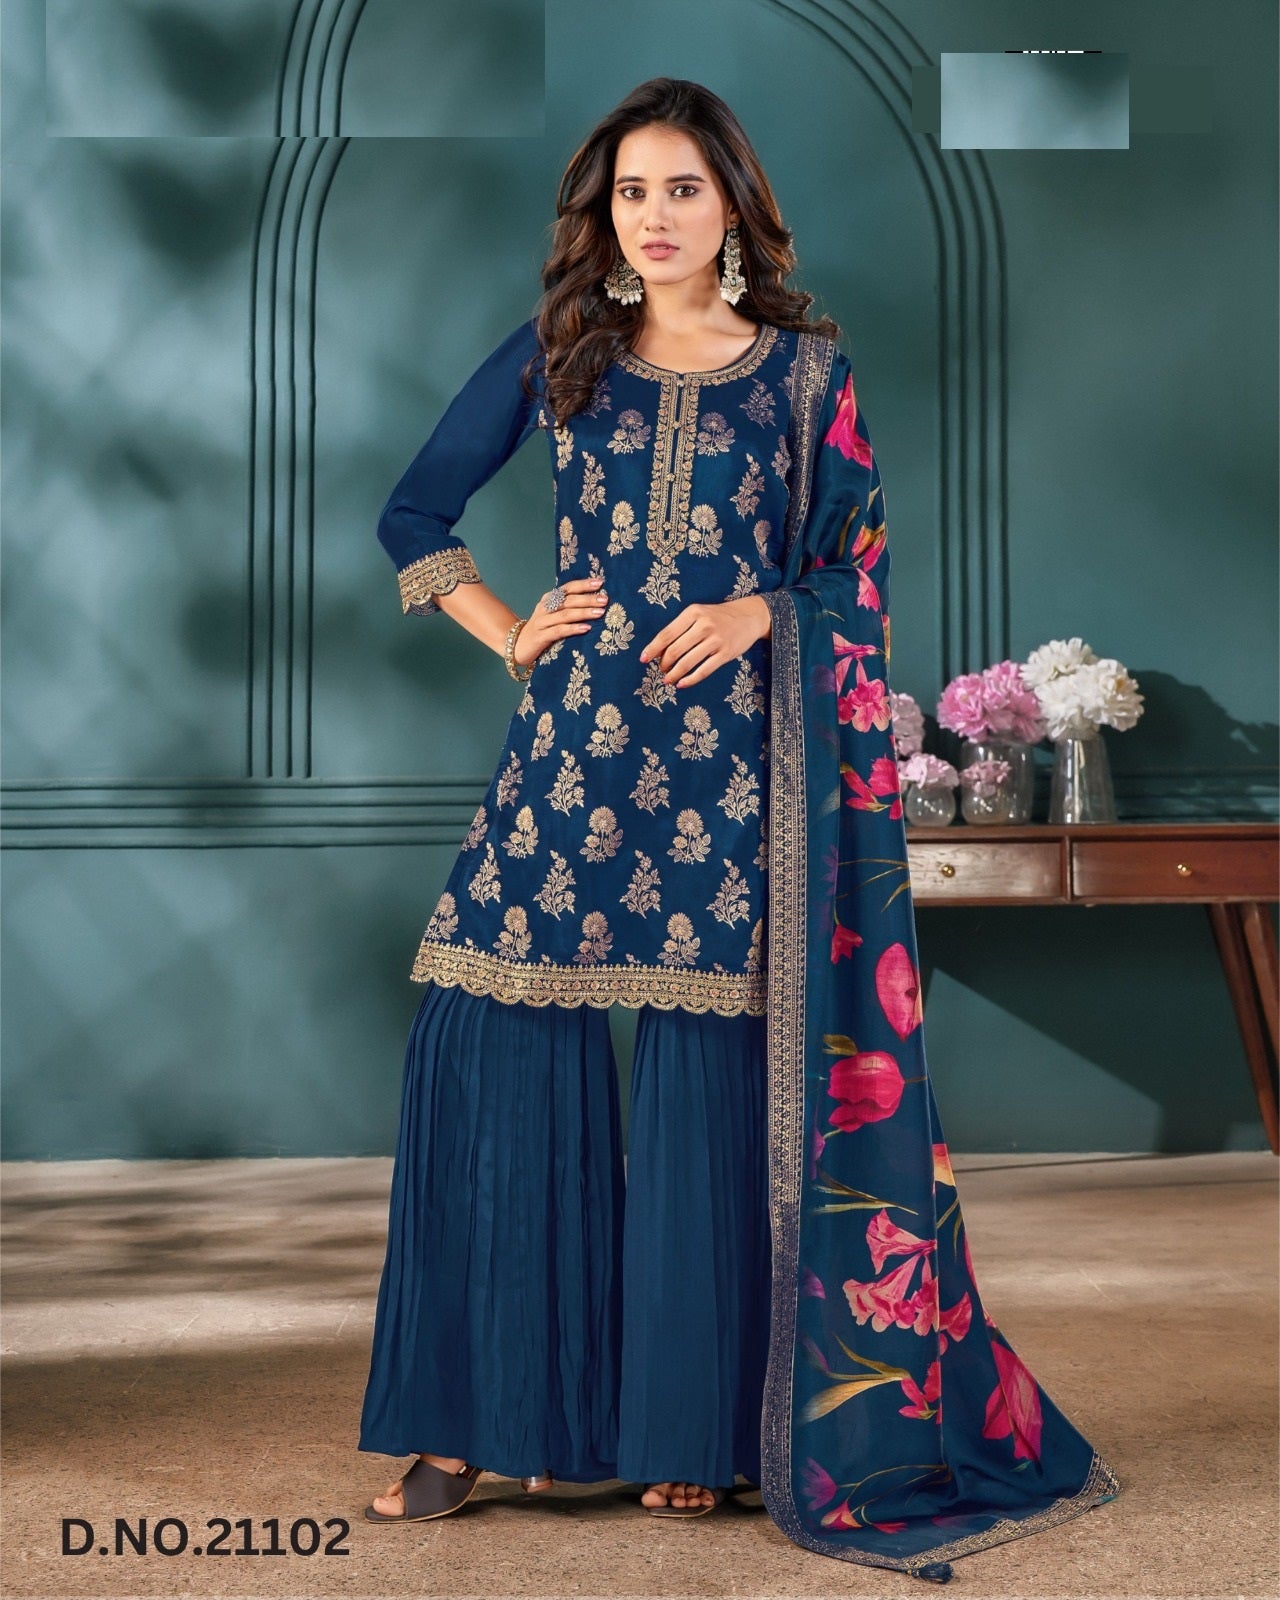 NAVY BLUE PALAZZO SUITS